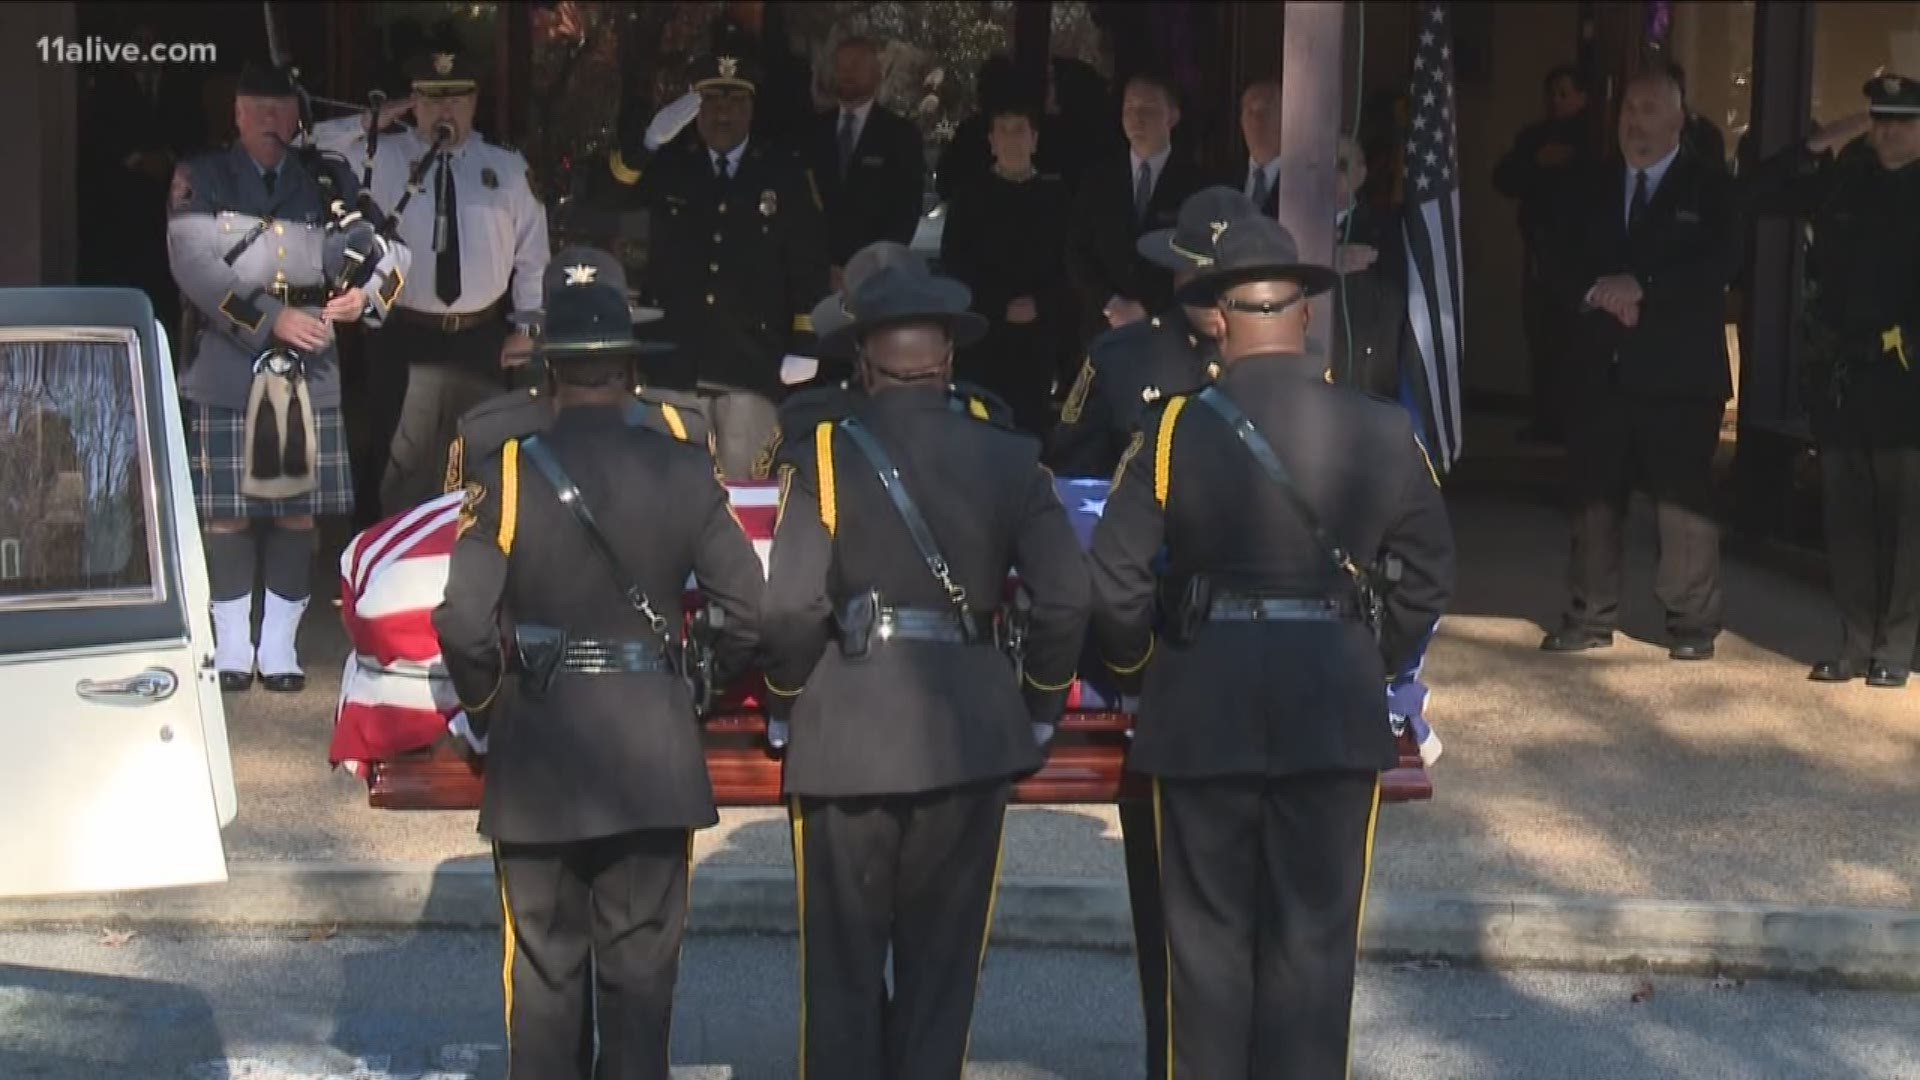 The sanctuary was filled with Flores' fellow officers, family and friends.